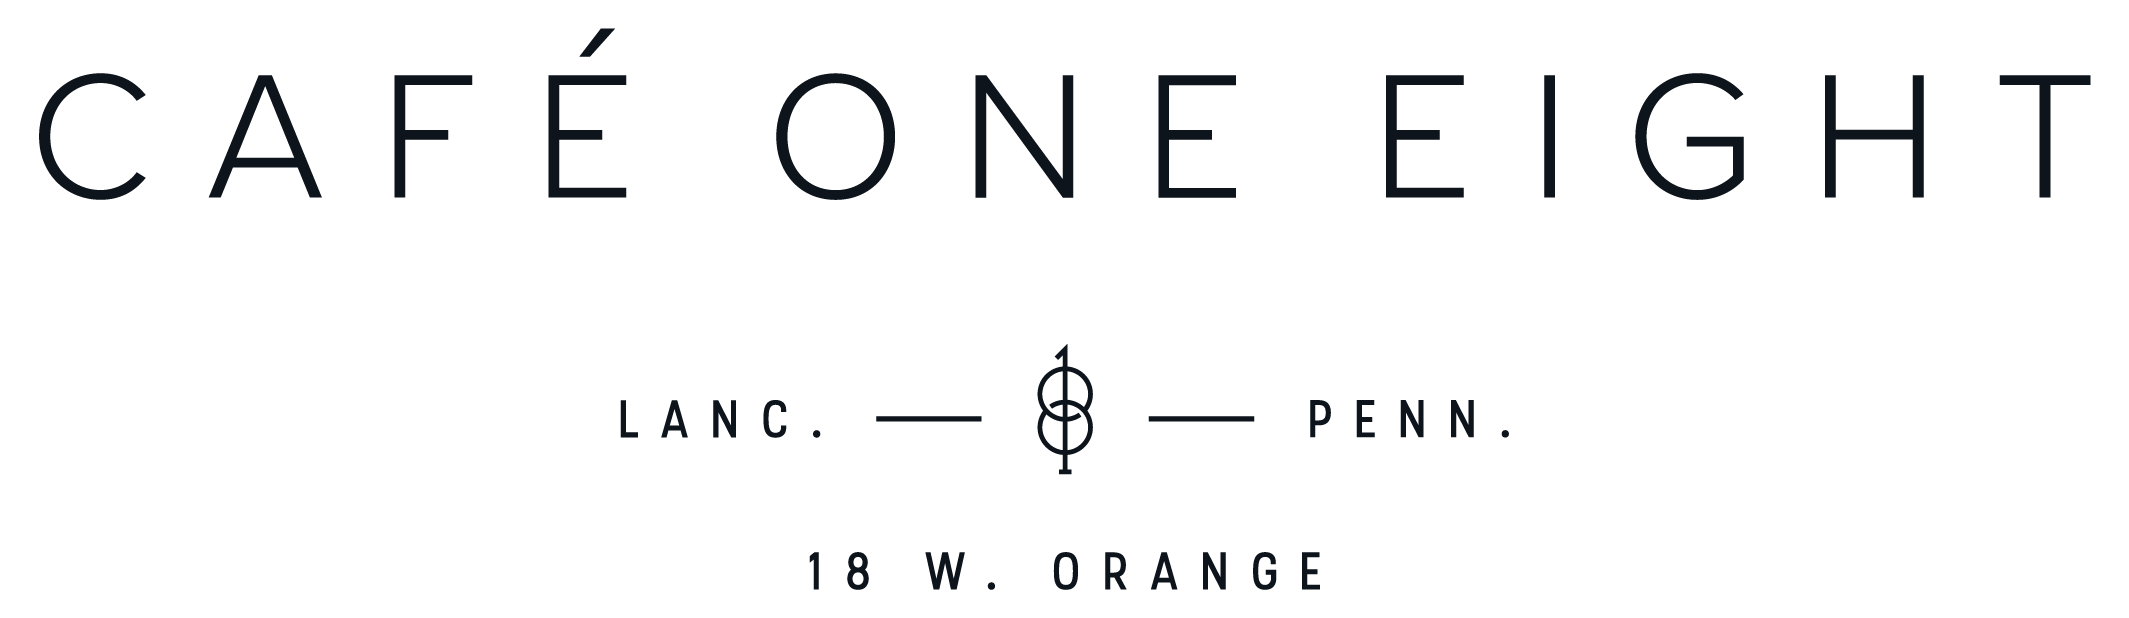 Cafe One Eight